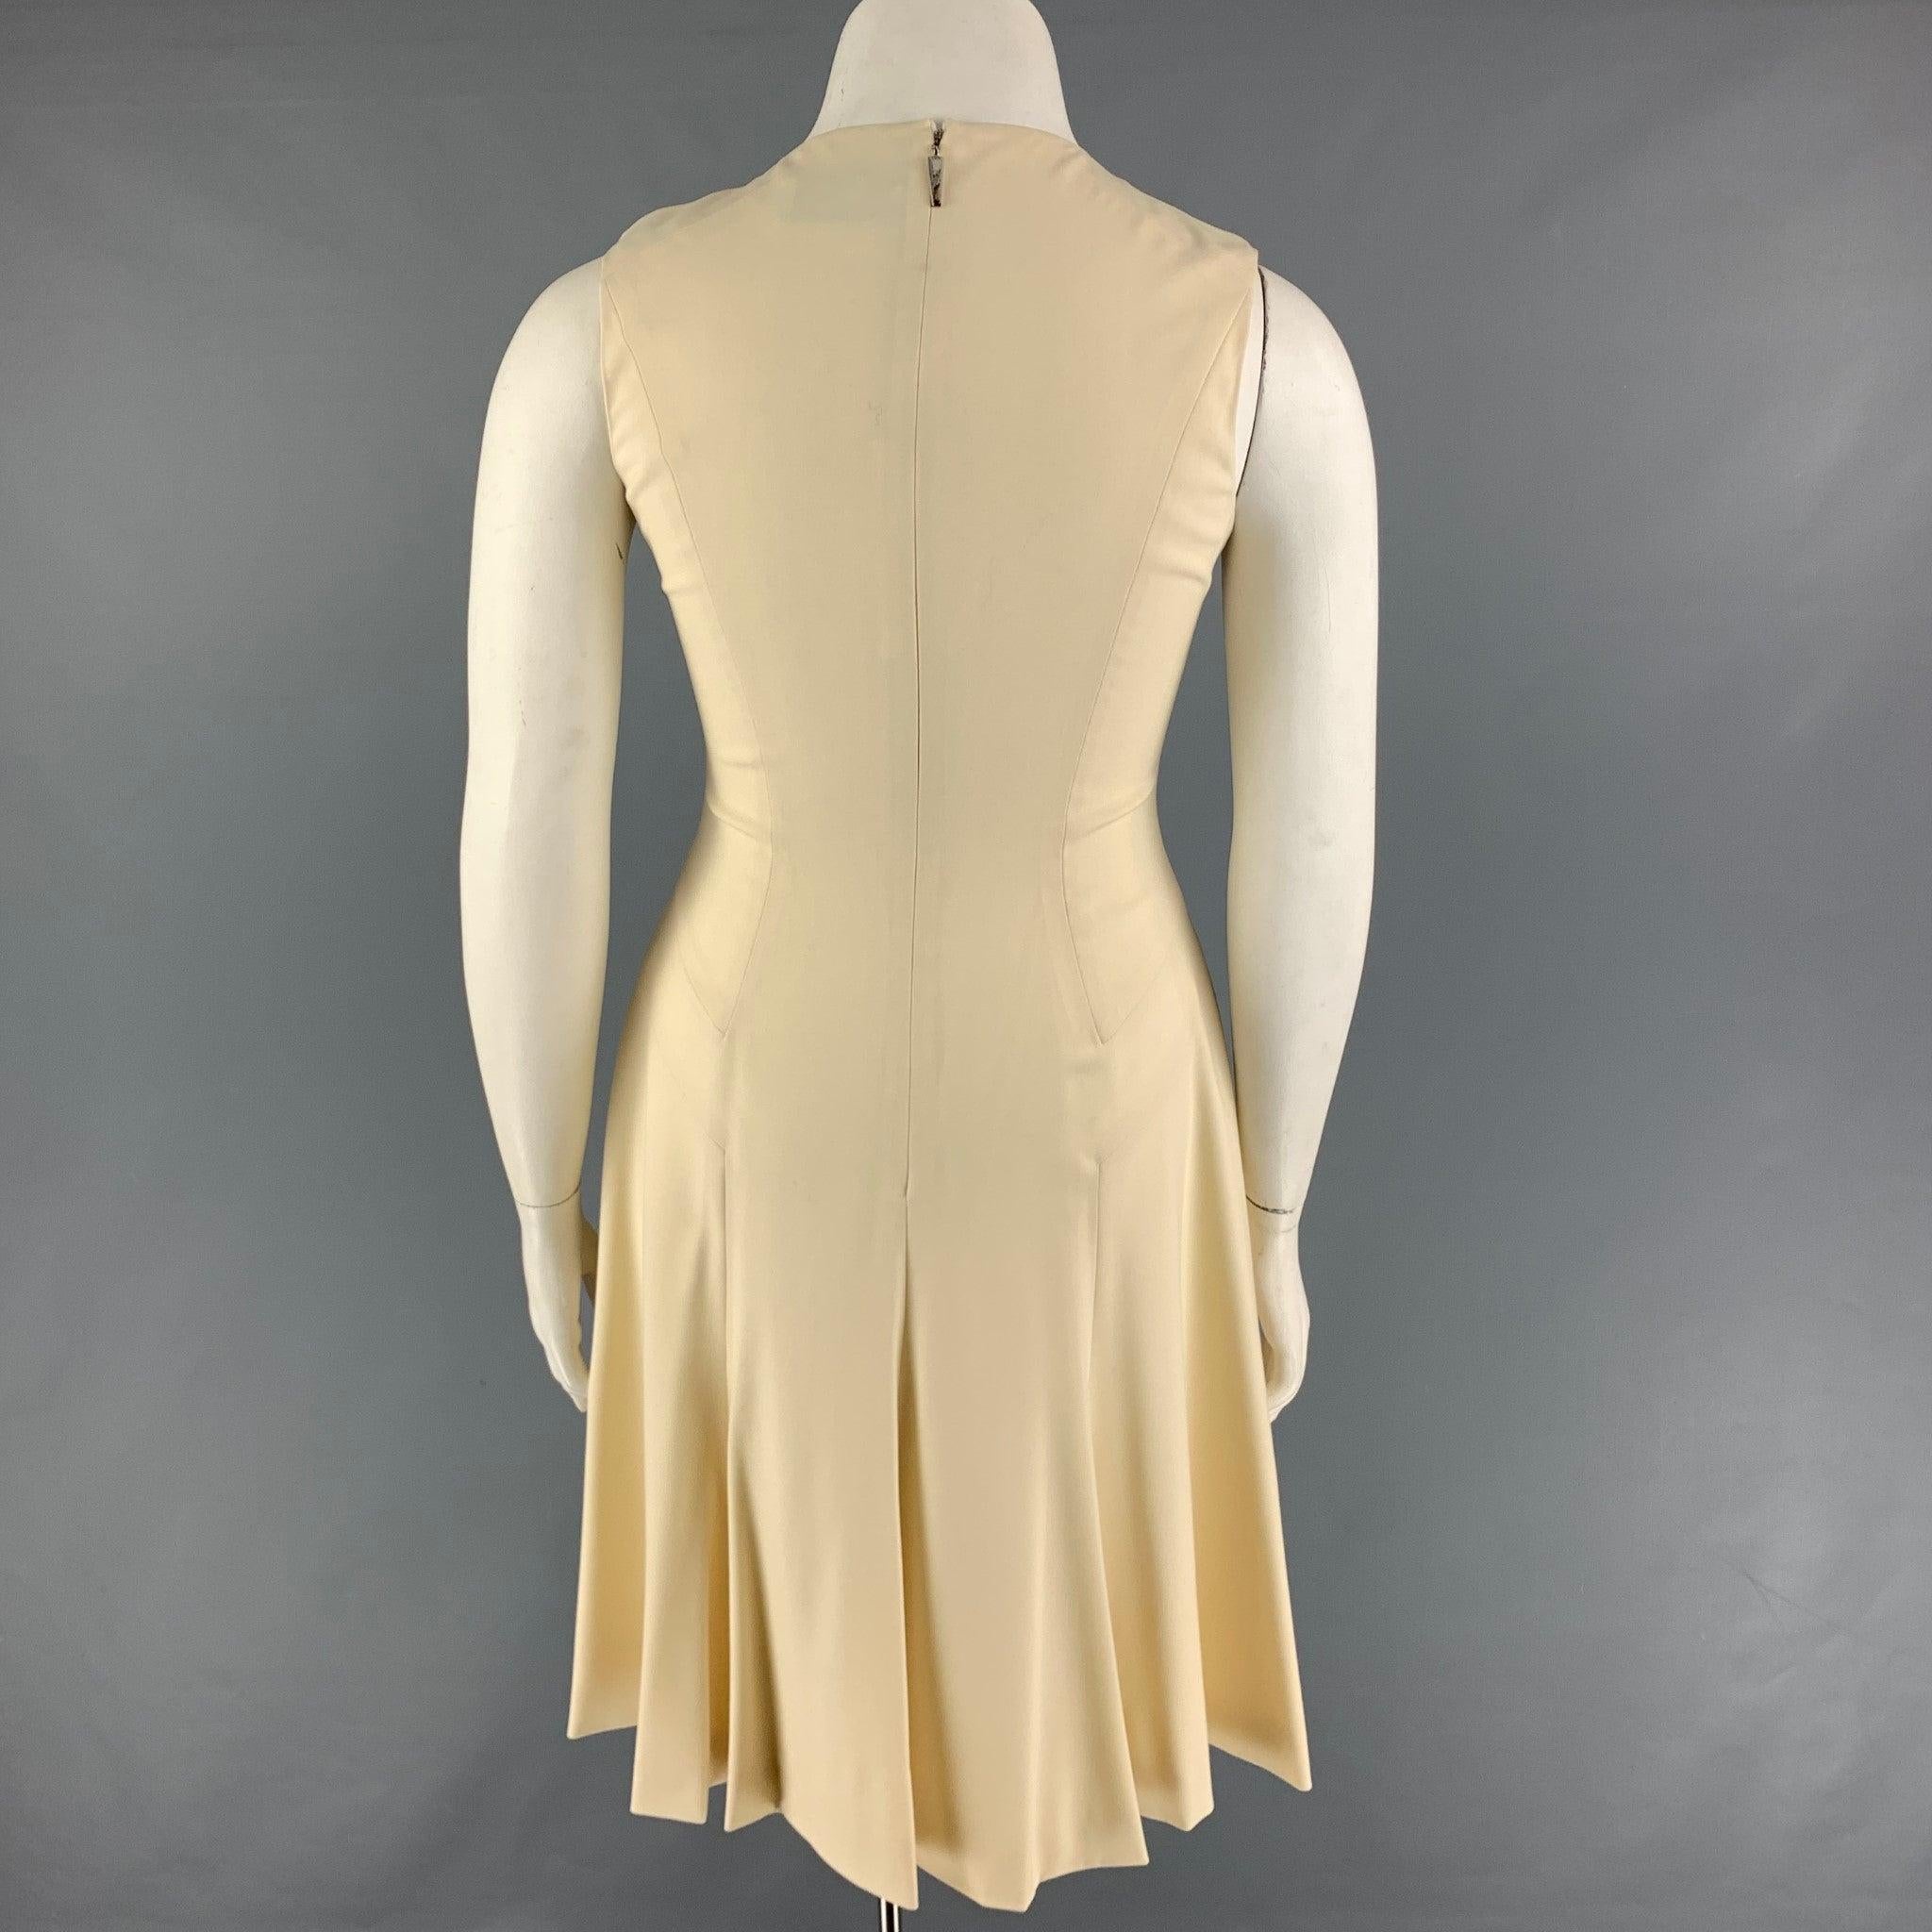 PRABAL GURUNG Size 10 Cream Wool A-Line Dress In Good Condition For Sale In San Francisco, CA